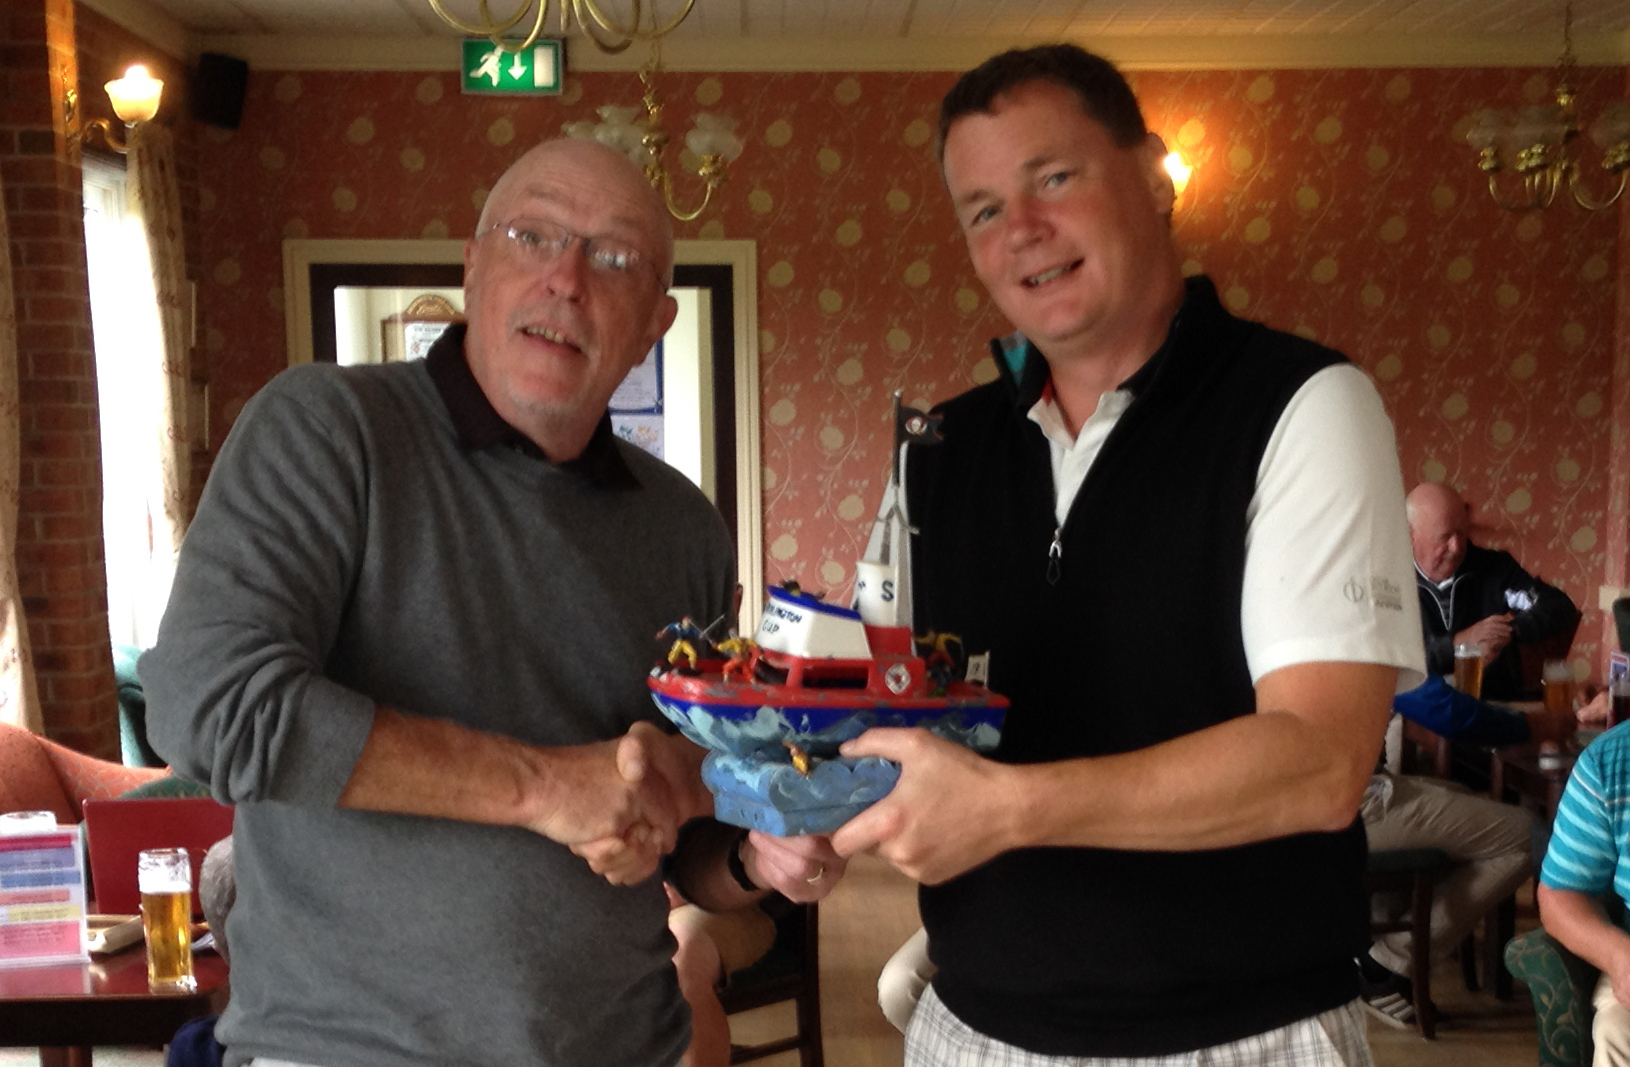 2016 Bridlington Admiral’s Cup – Dearsley Floats the Boat !